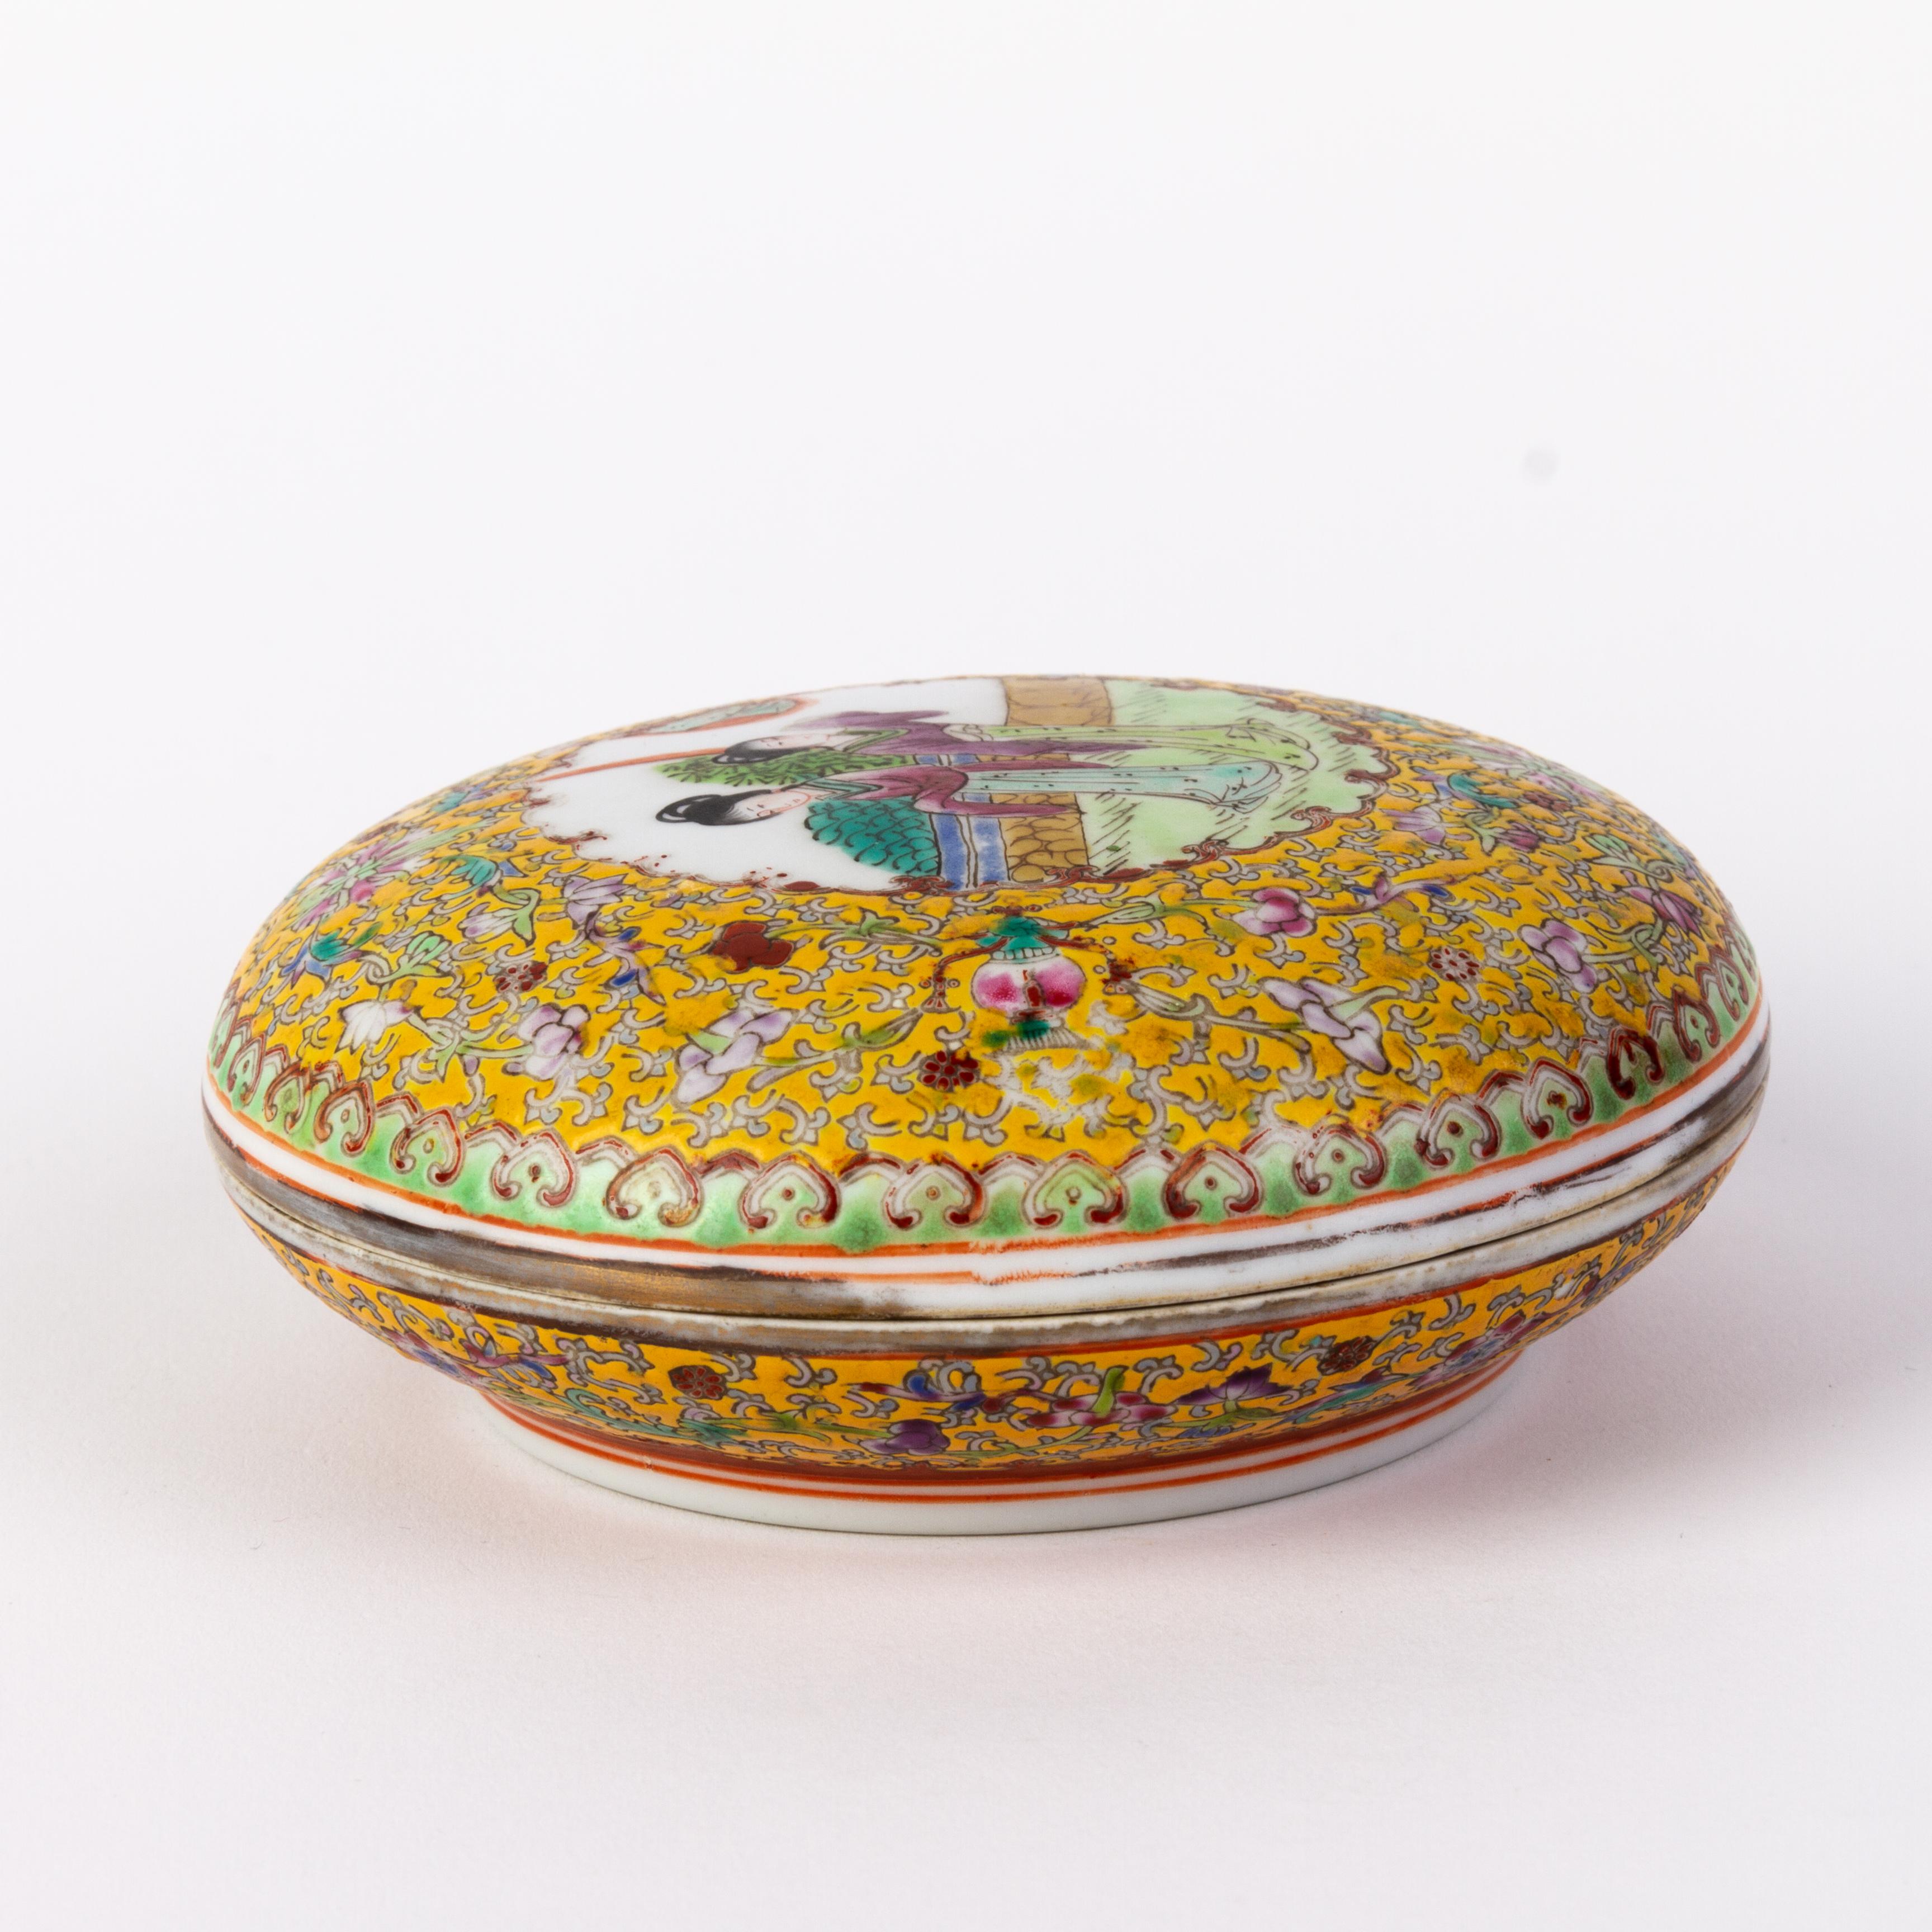 Chinese Qianlong Seal Mark Famille Jaune Lidded Paste Box 18th Century
Good condition overall
From a private collection.
Free international shipping.